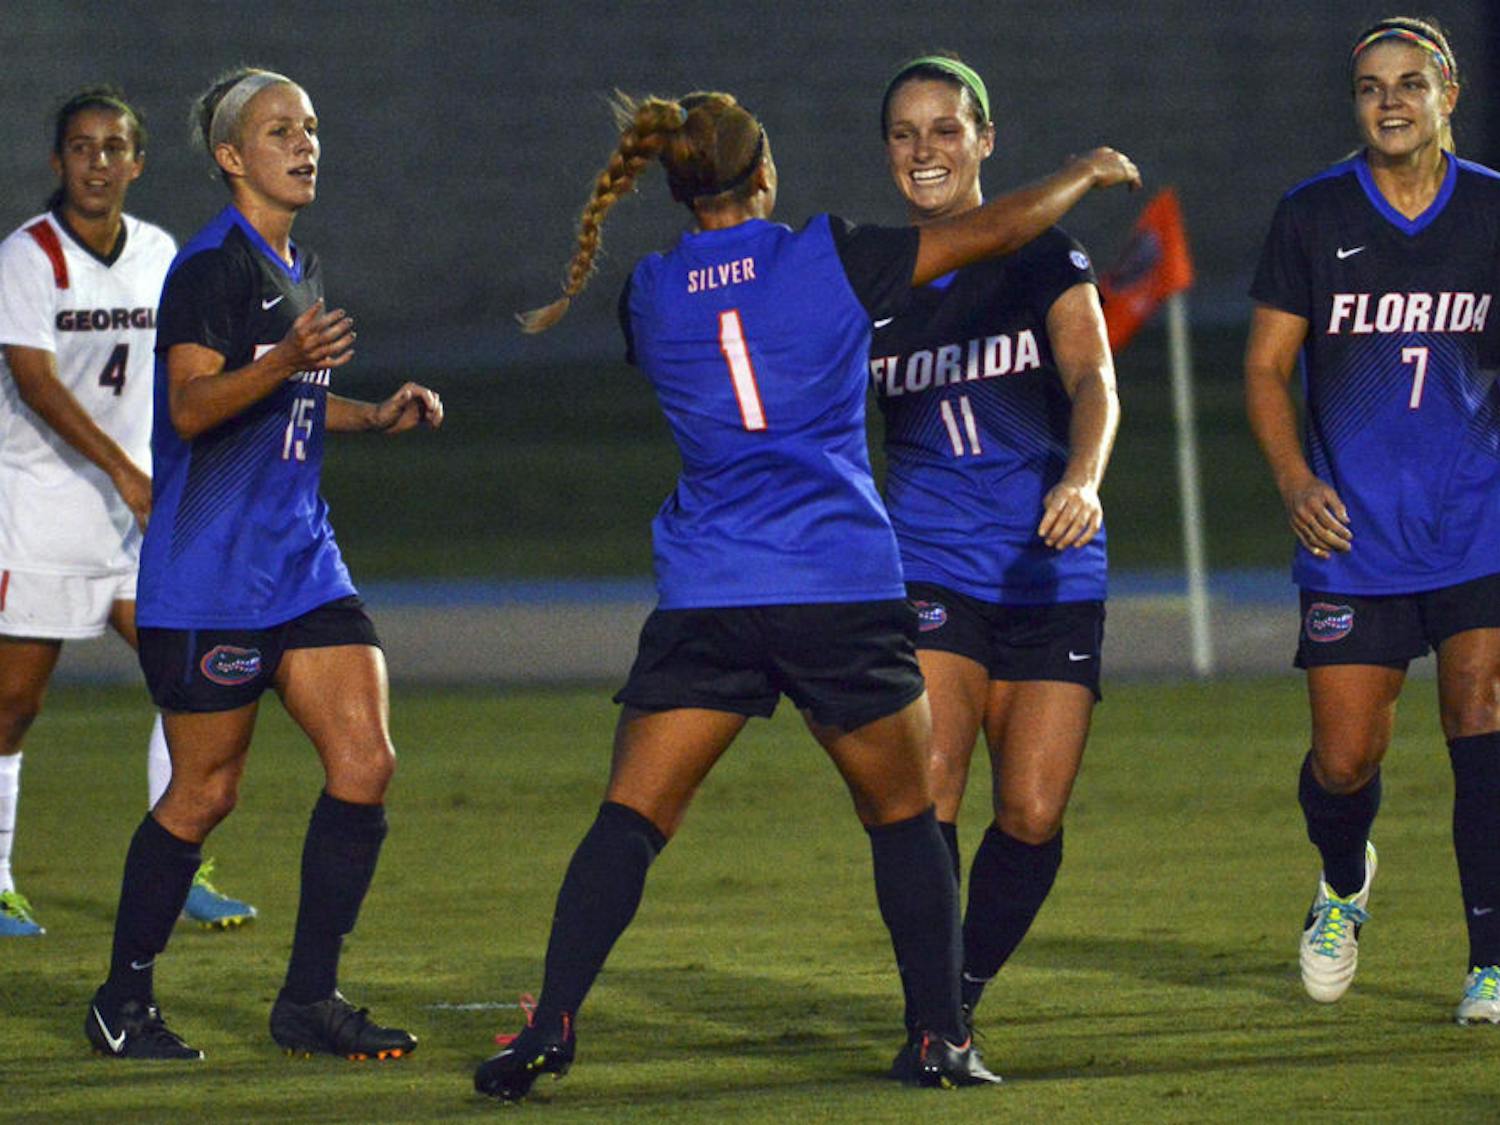 Brooke Sharp (11) celebrates with teammates following her goal during Florida's 2-1 win against Georgia on Friday at James G. Pressly Stadium.